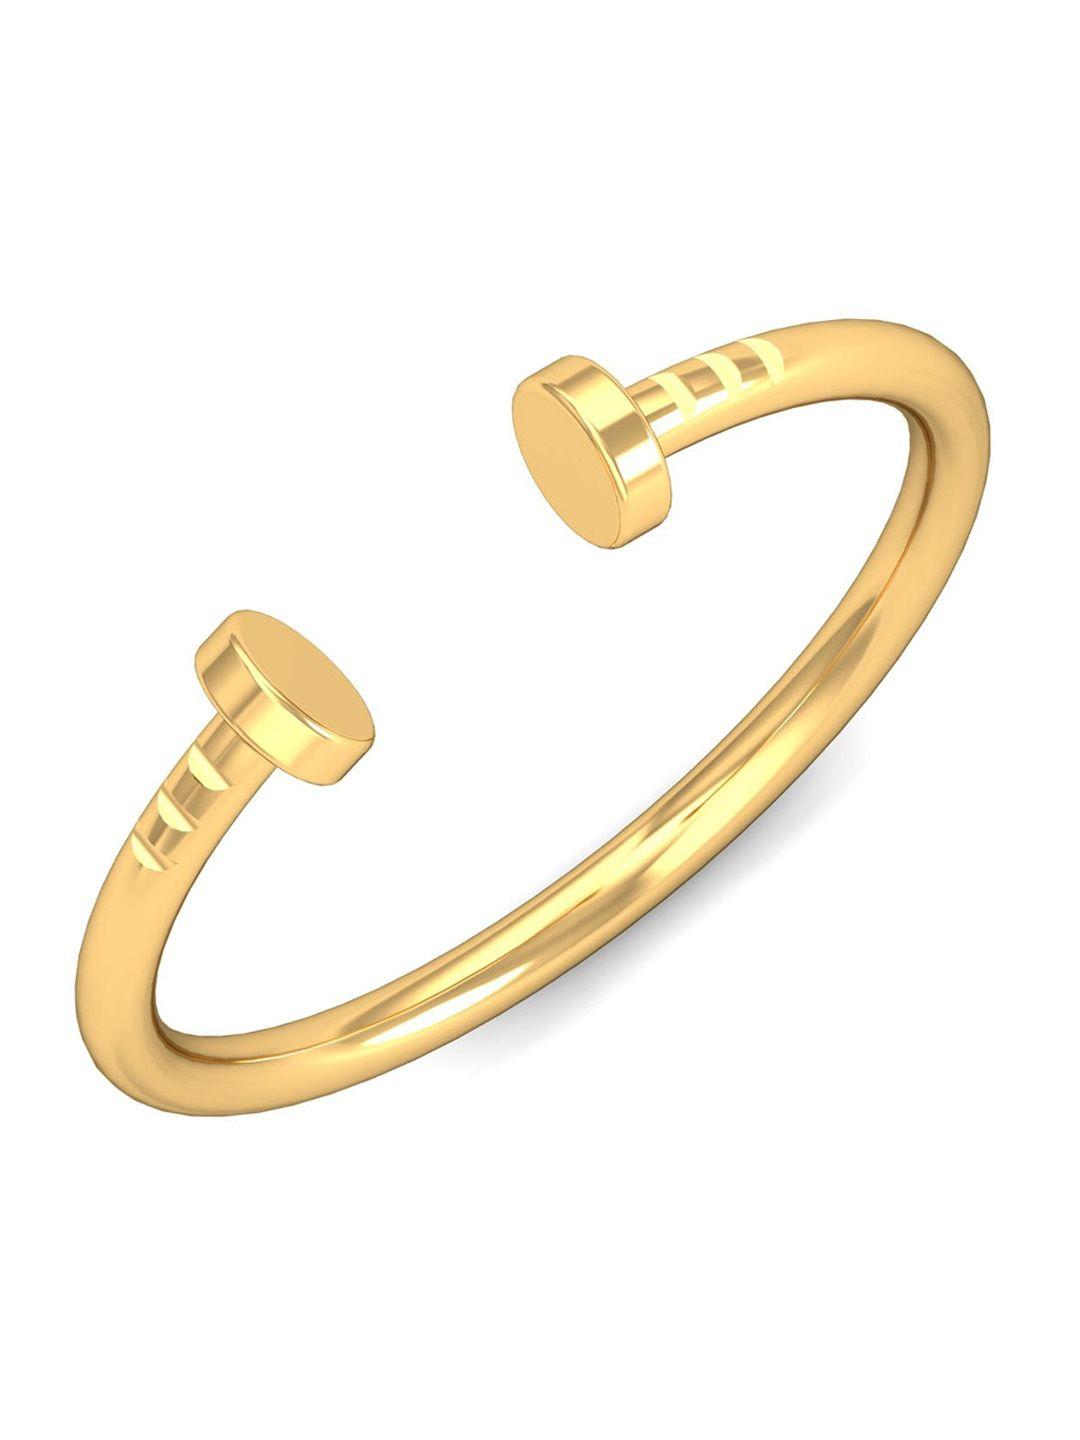 kuberbox nail-it open 18kt gold ring-1.66gm